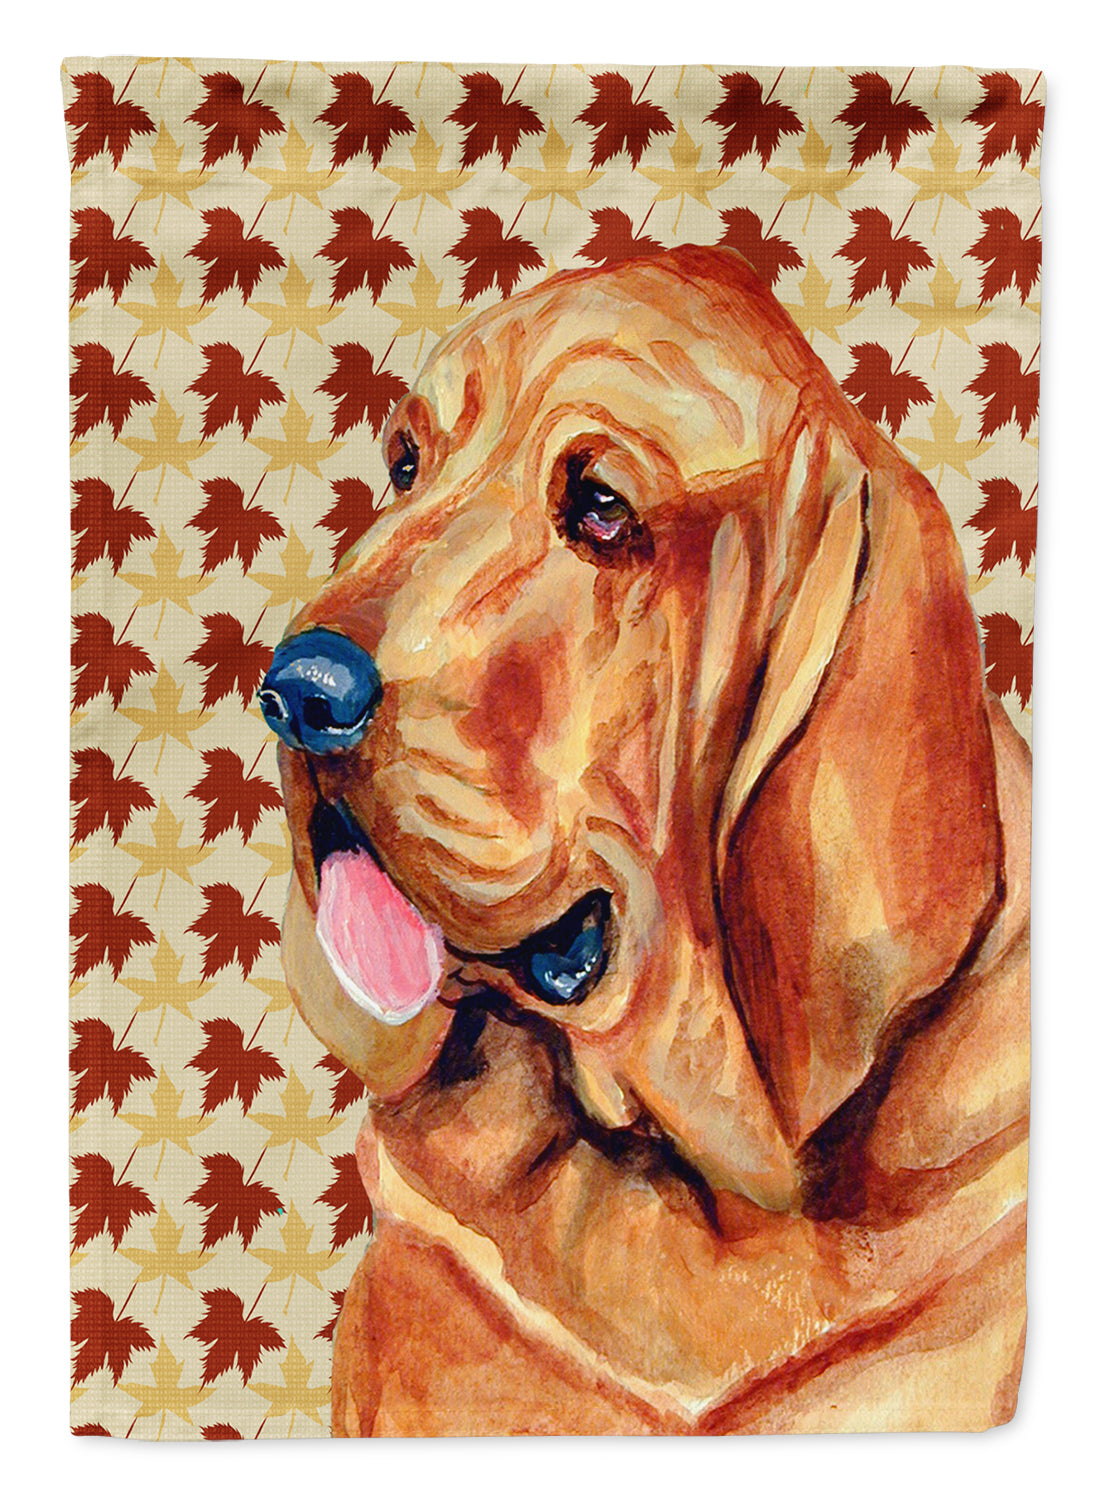 Bloodhound Fall Leaves Portrait Flag Garden Size.